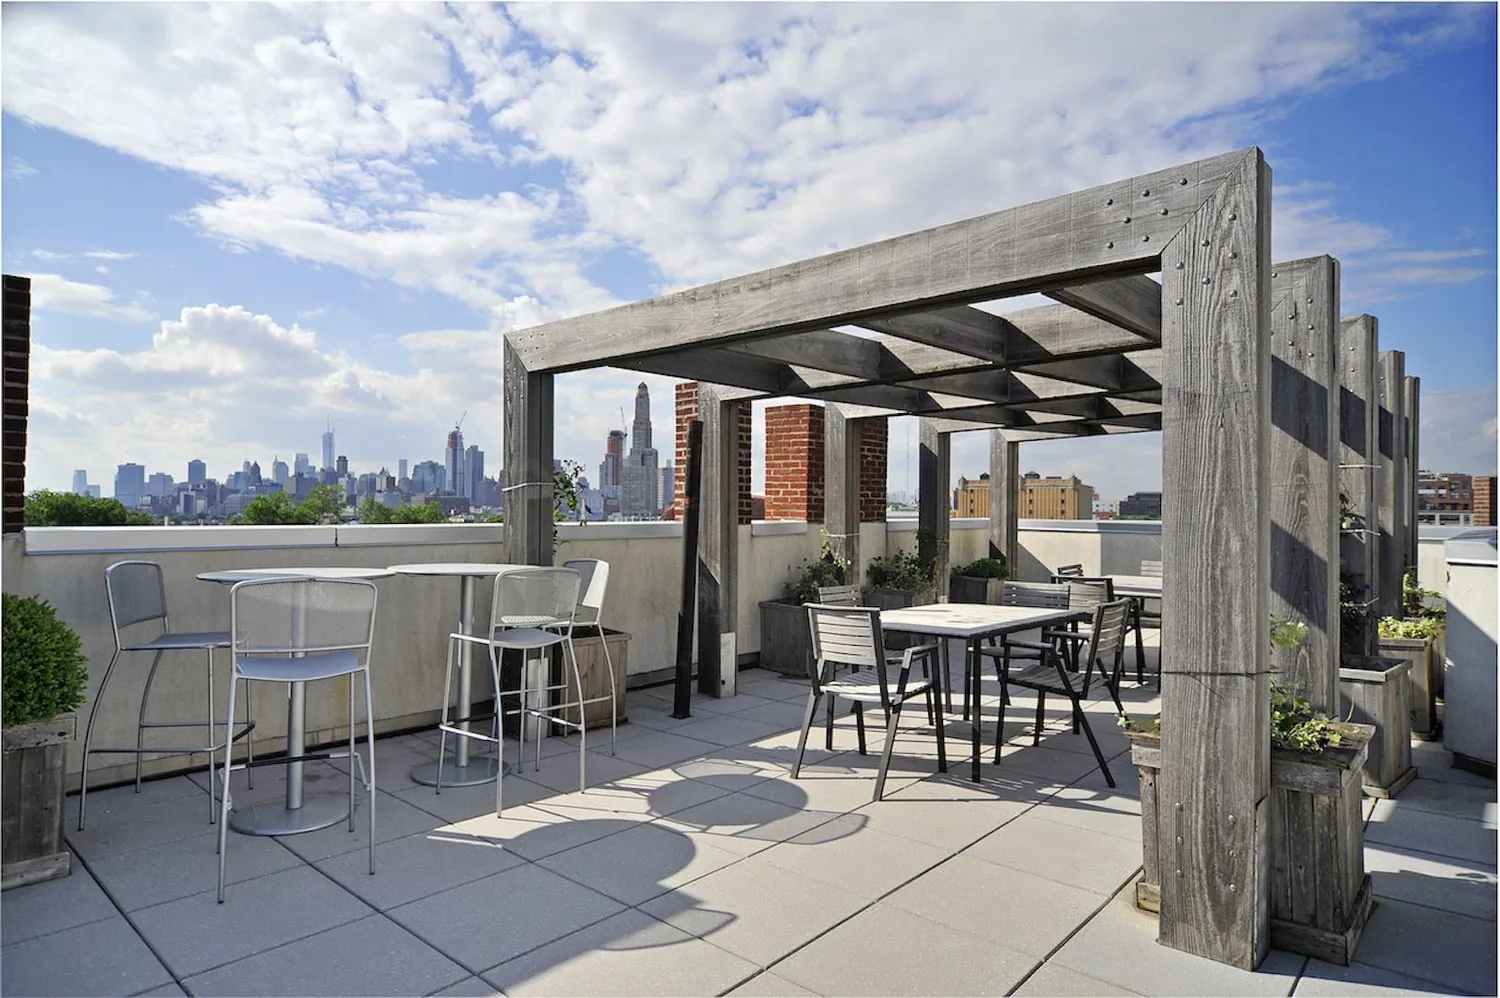 5th Floor Roof Deck with Phenomenal Views!